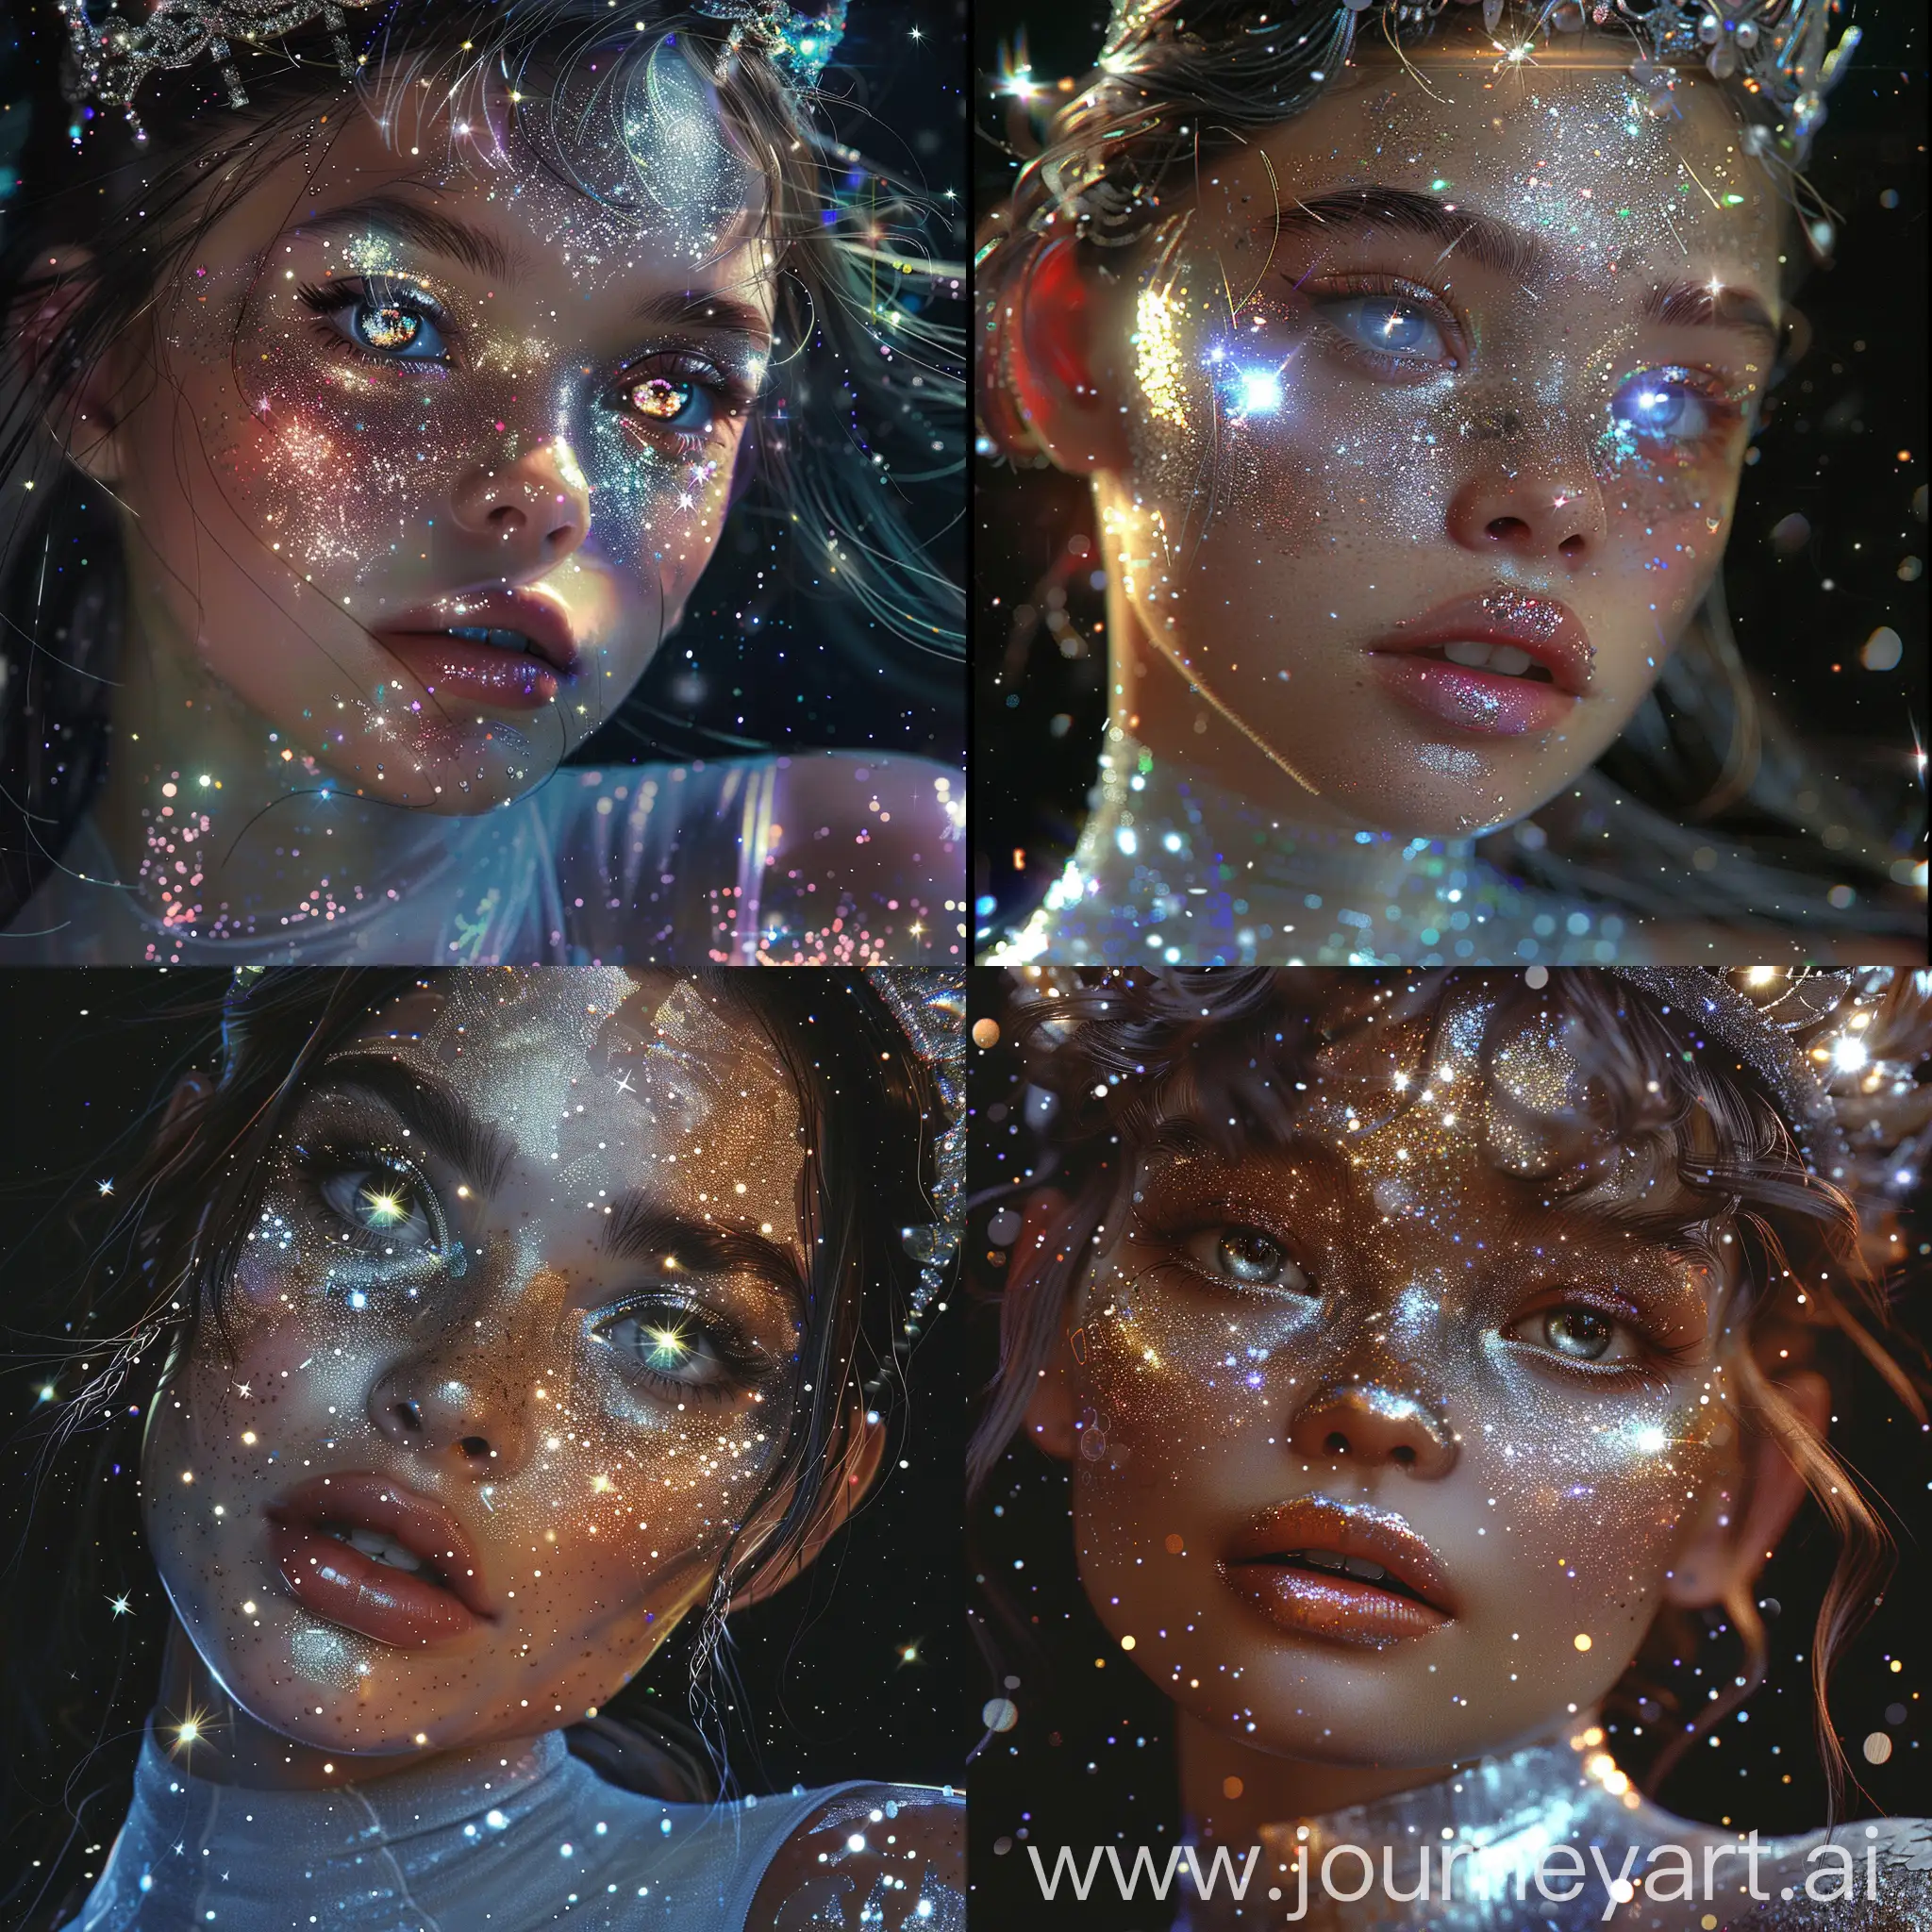 Ethereal-Futuristic-Girl-with-Glittering-Crown-in-Cosmic-Darkness